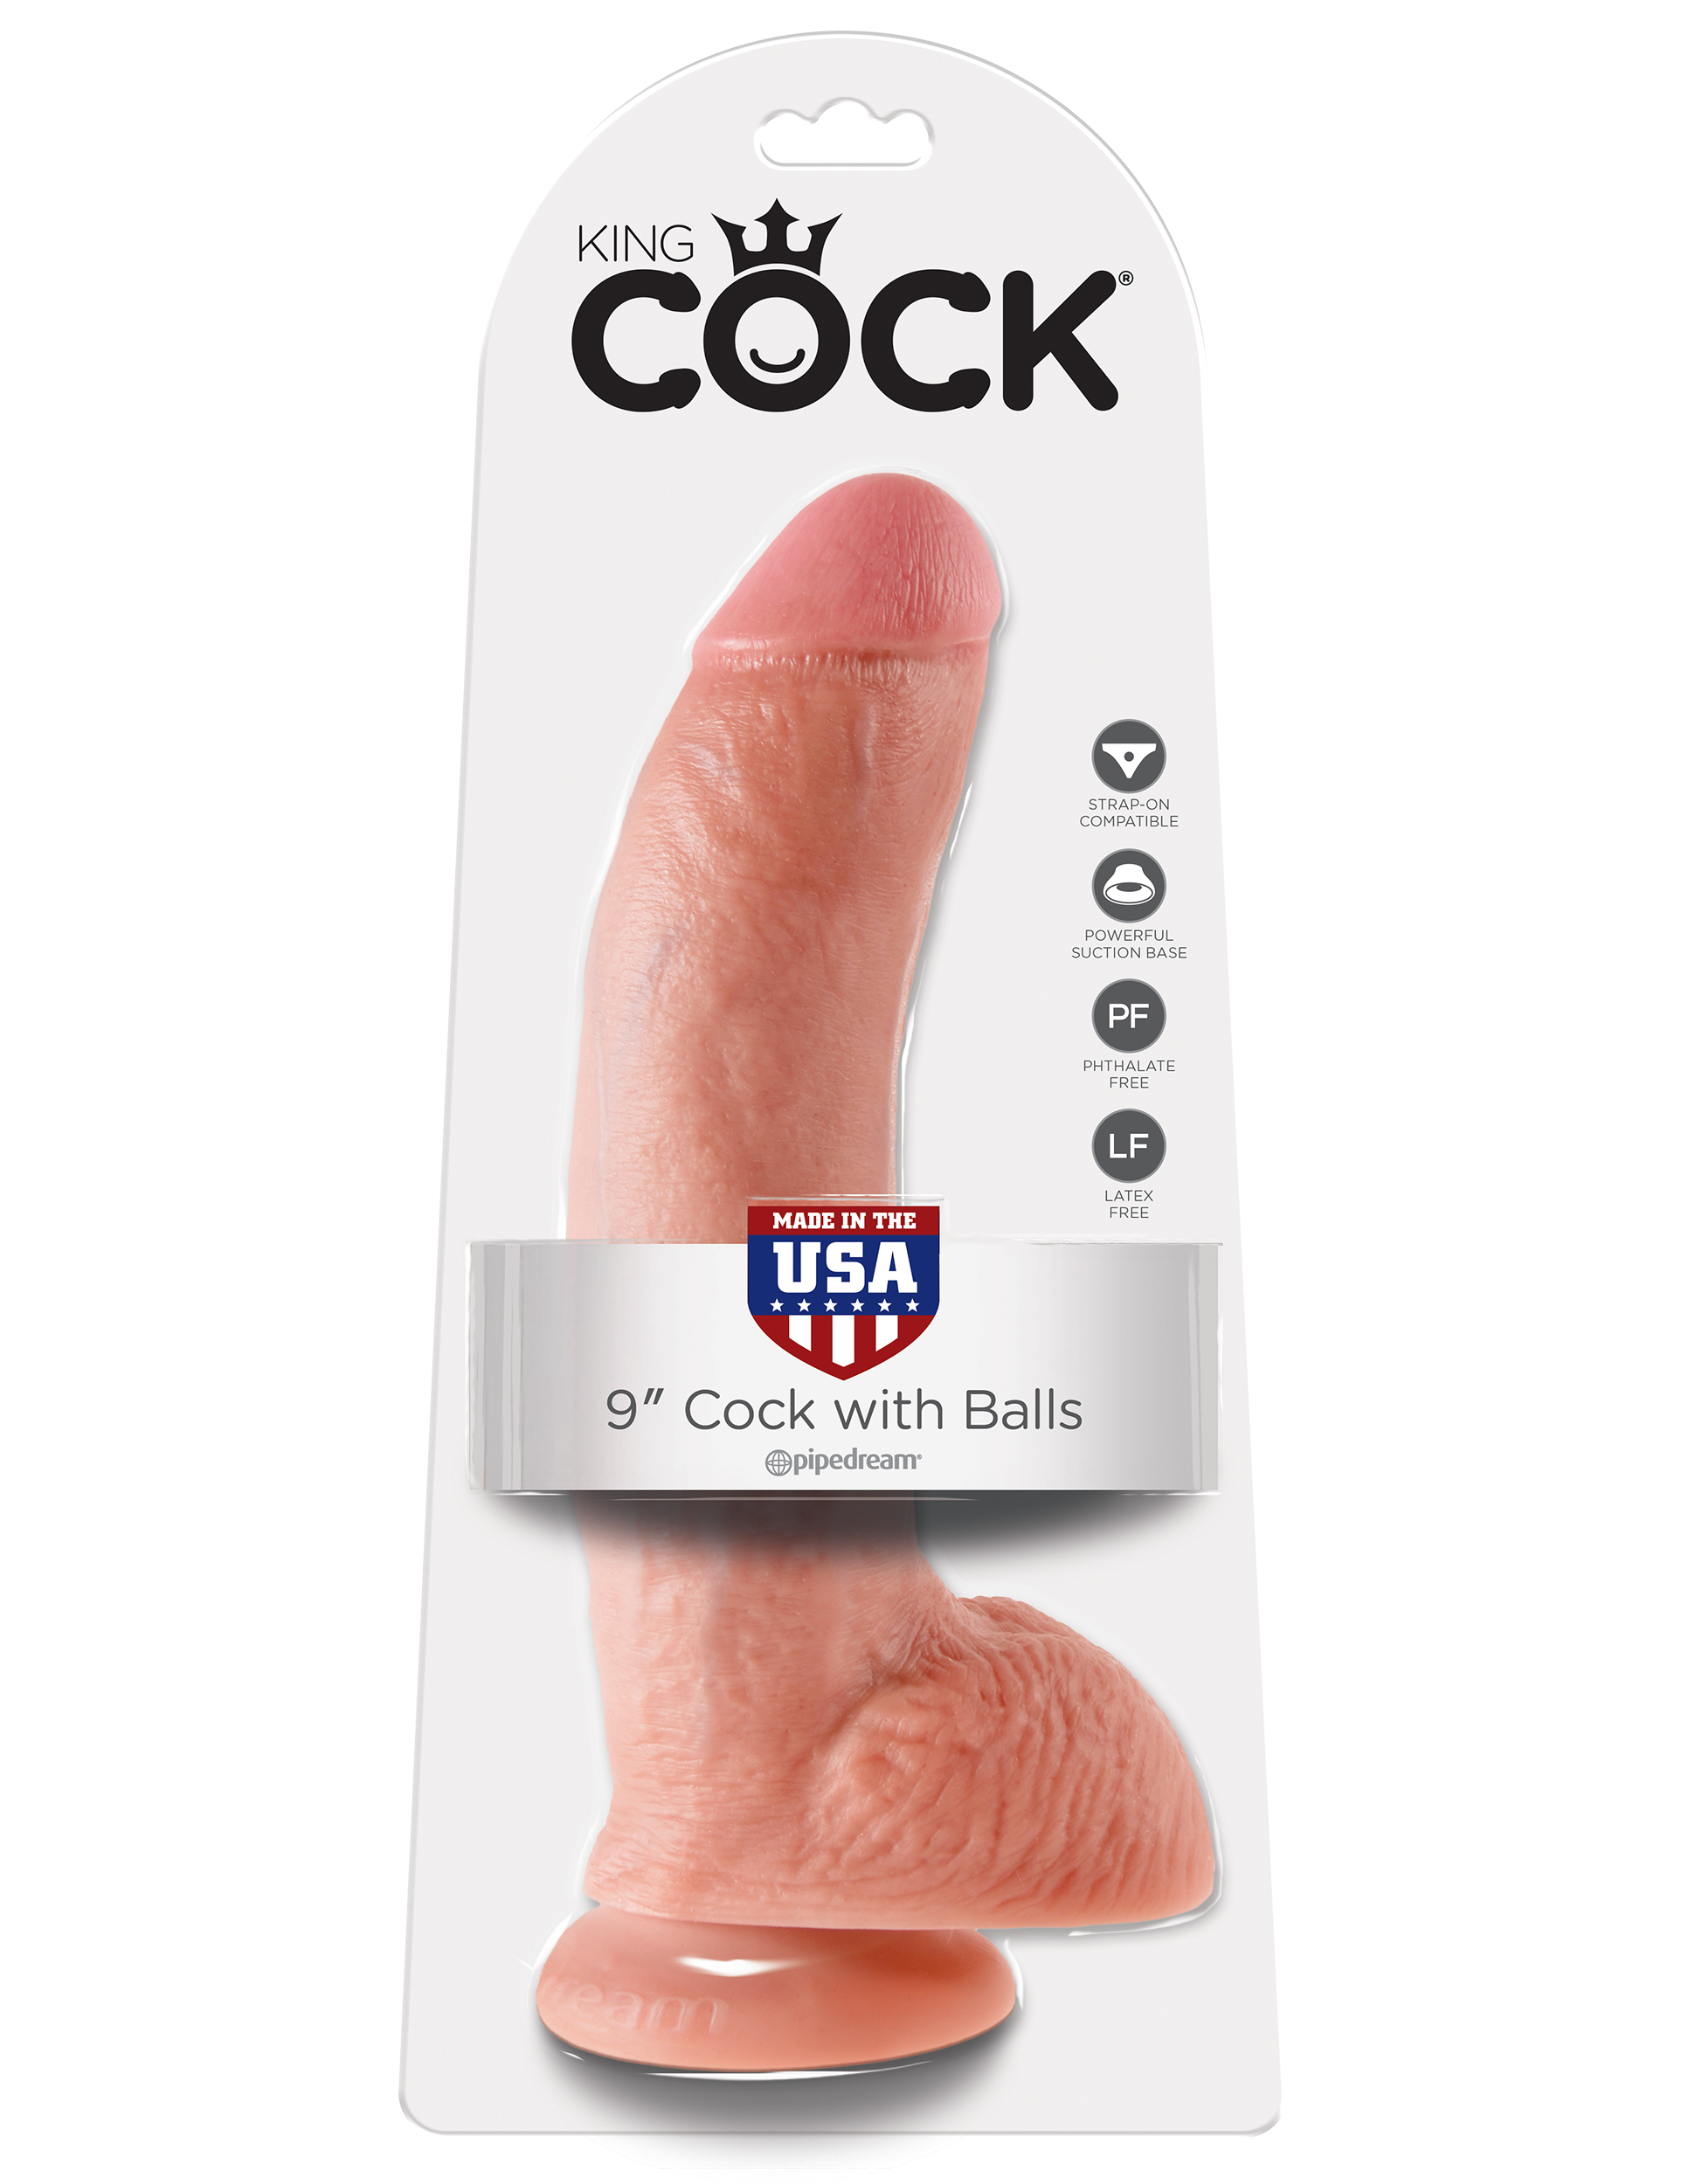    9 Cock with Balls